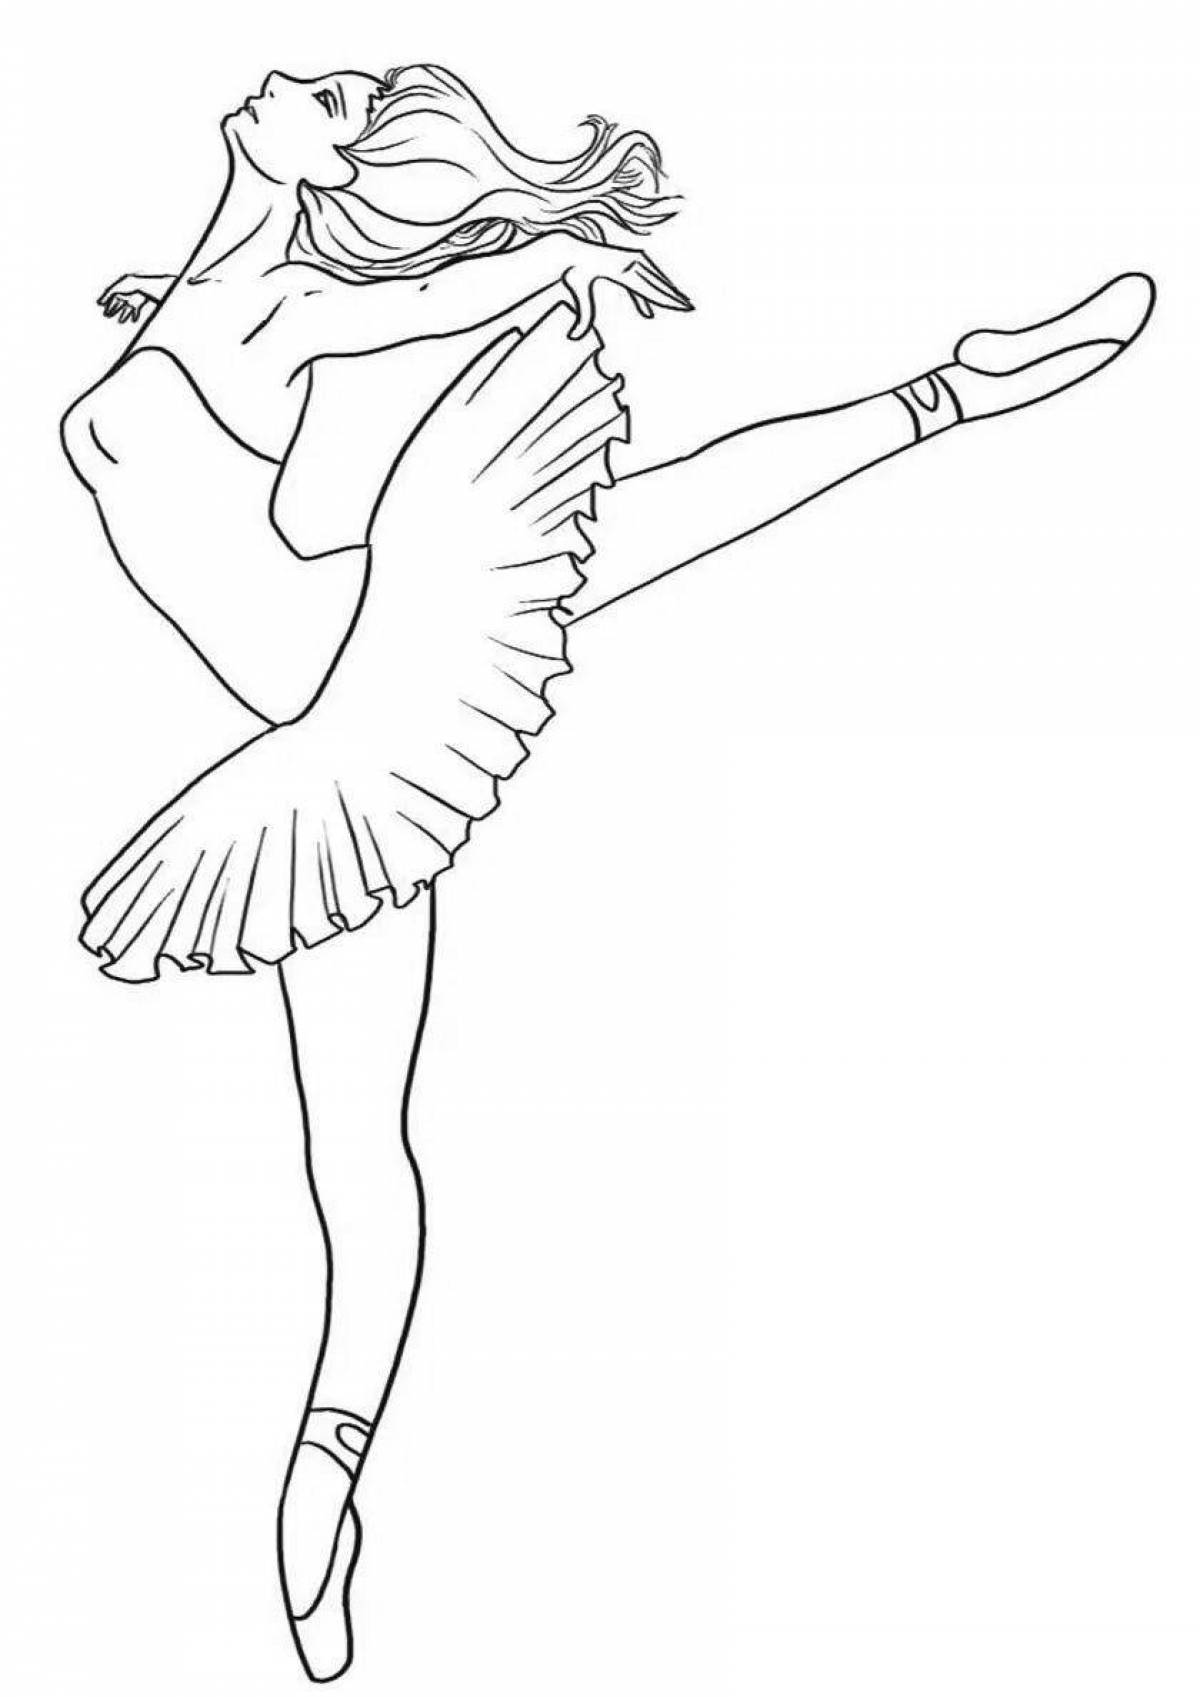 Coloring page clever dancer